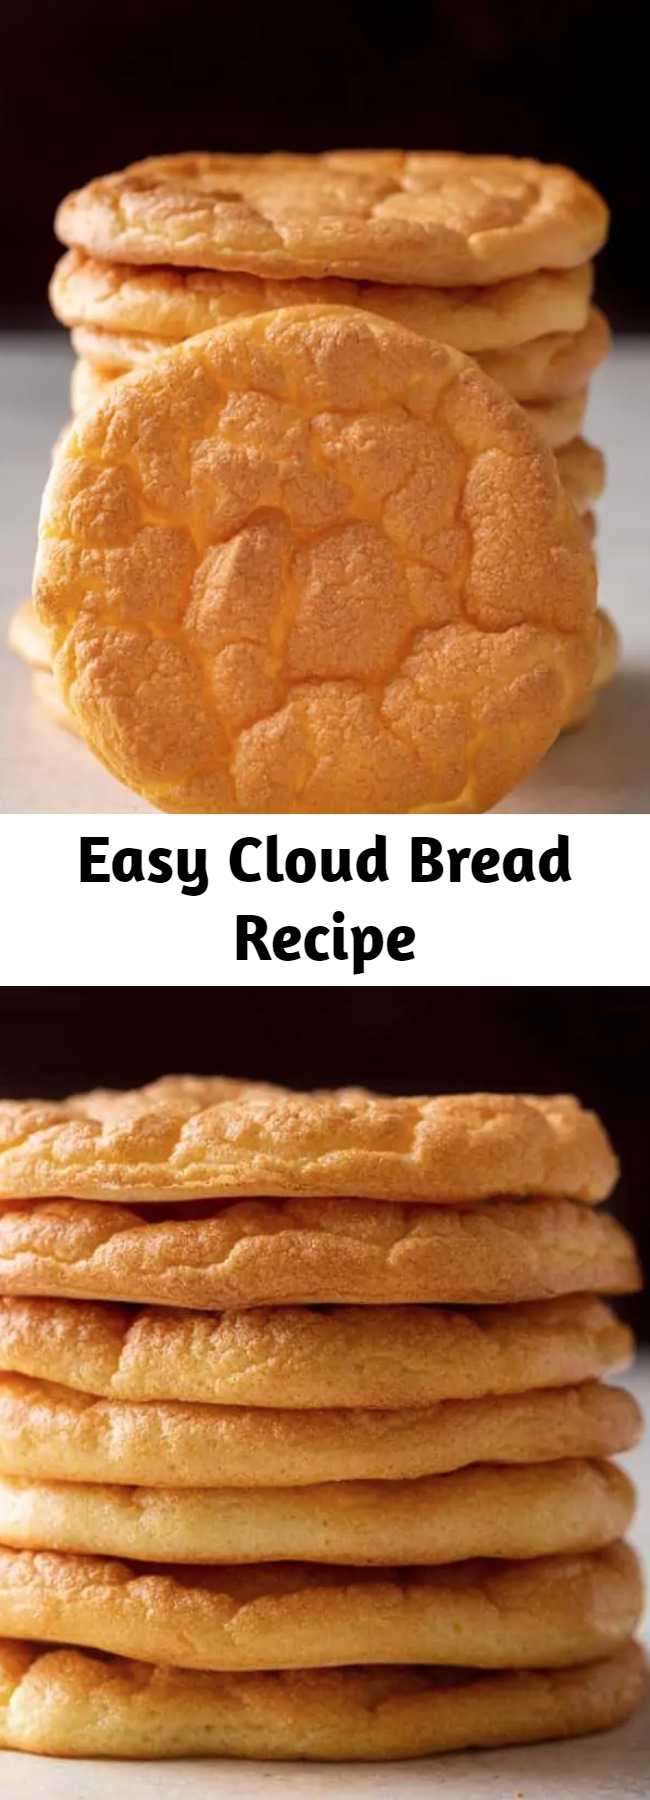 Easy Cloud Bread Recipe - This simple cloud bread recipe is a low carb, keto friendly option that is light, fluffy, and great for sandwiches. #bread #baking #lowcarb #keto #glutenfree